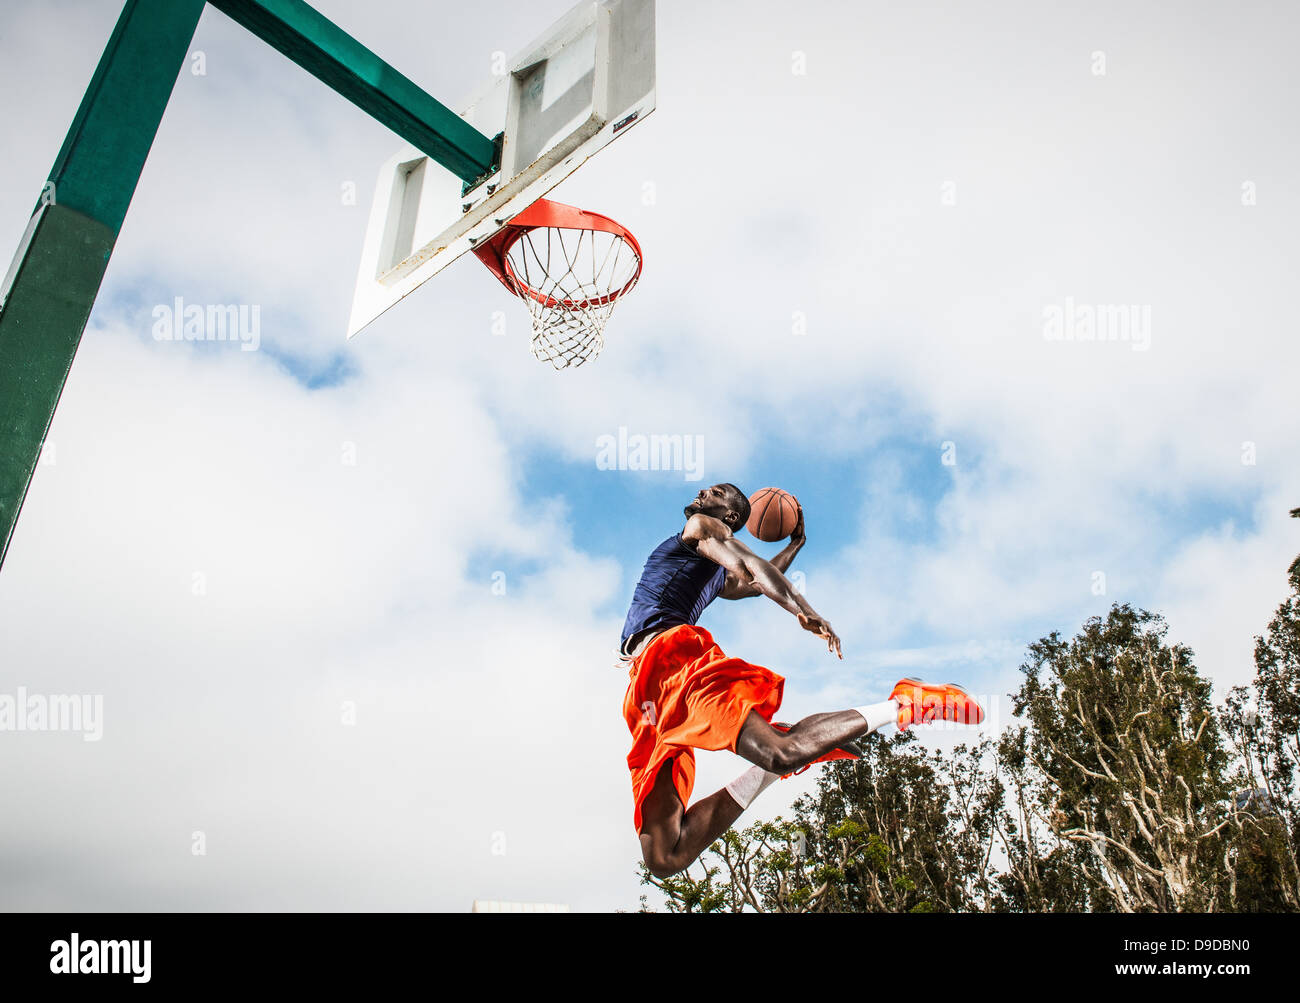 Young man jumping to score hoop in basketball Stock Photo